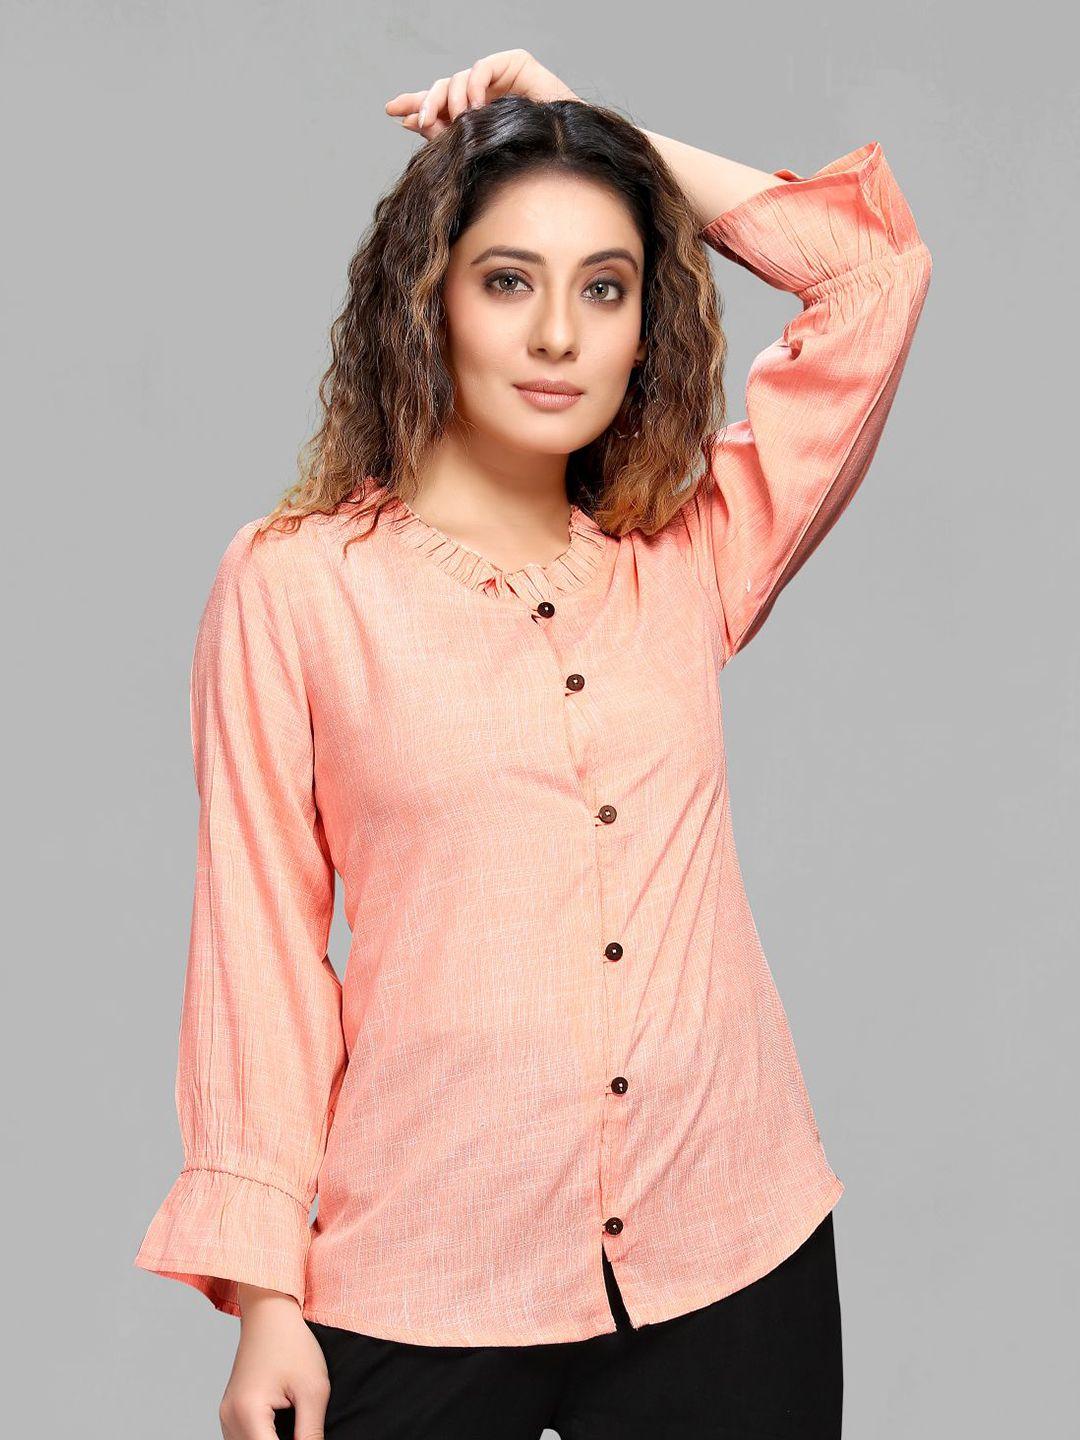 maiyee round neck puff sleeve shirt style top